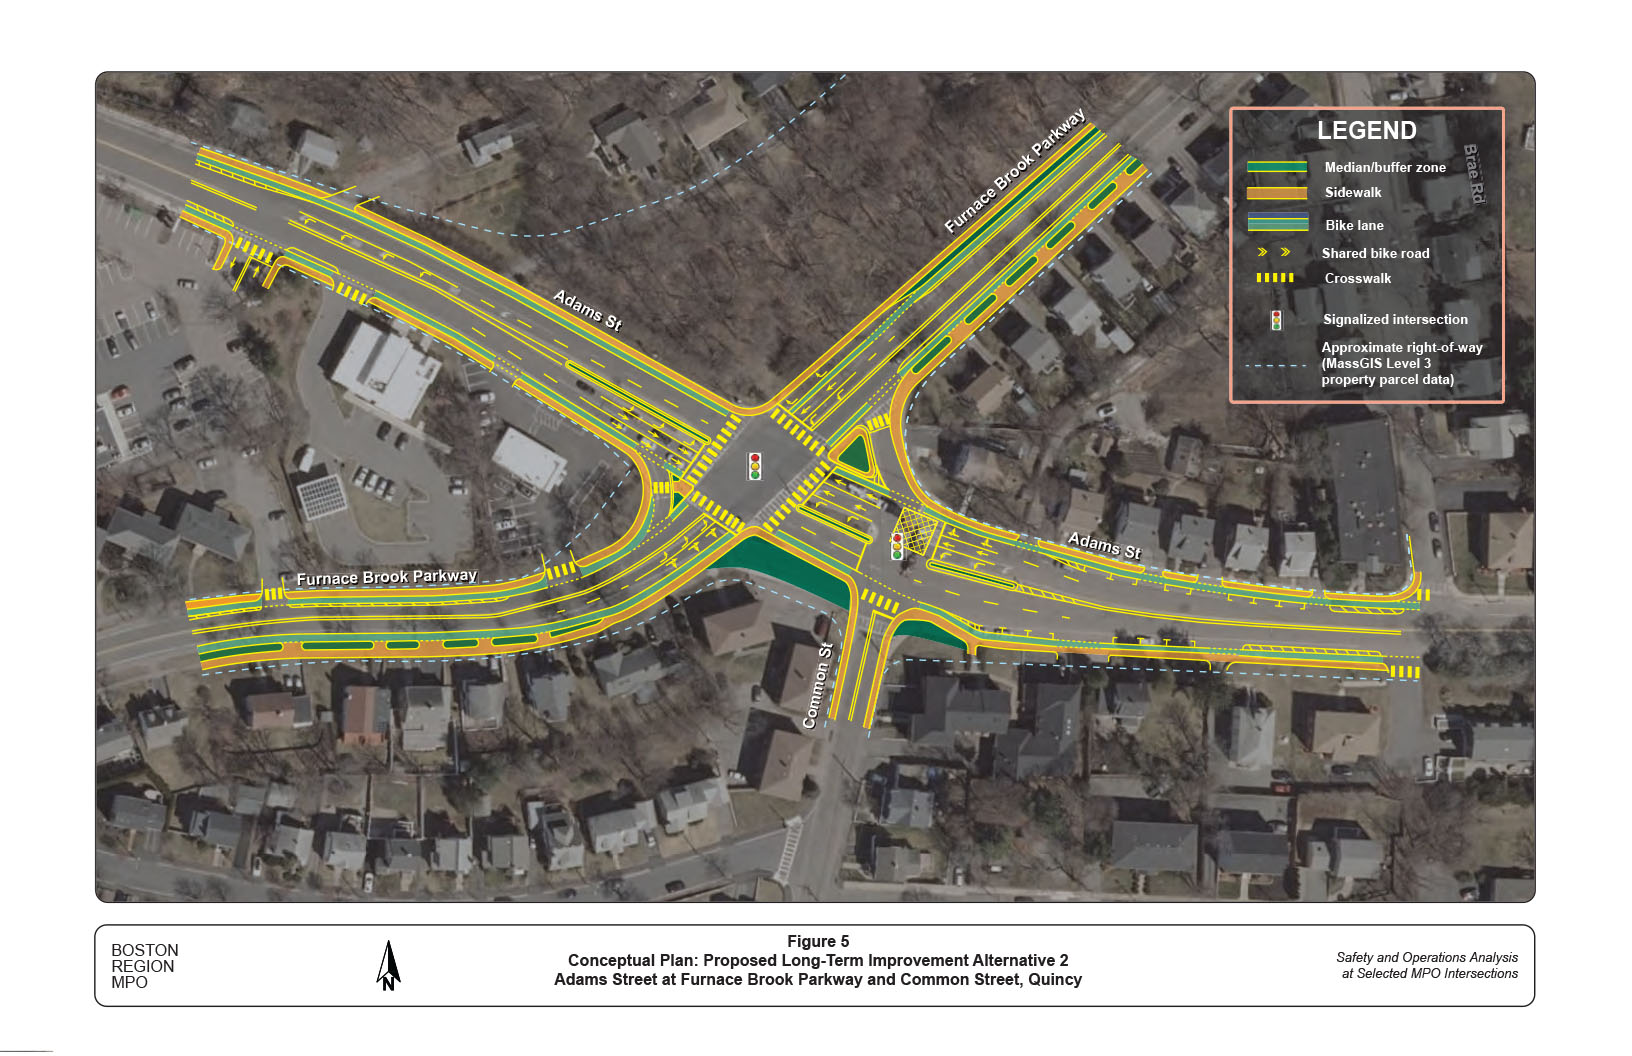 Figure 5: Proposed Long-Term Improvement Alternative 2
This figure shows a conceptual plan view of the proposed roadway modifications in the long-term improvement Alternative 2.
